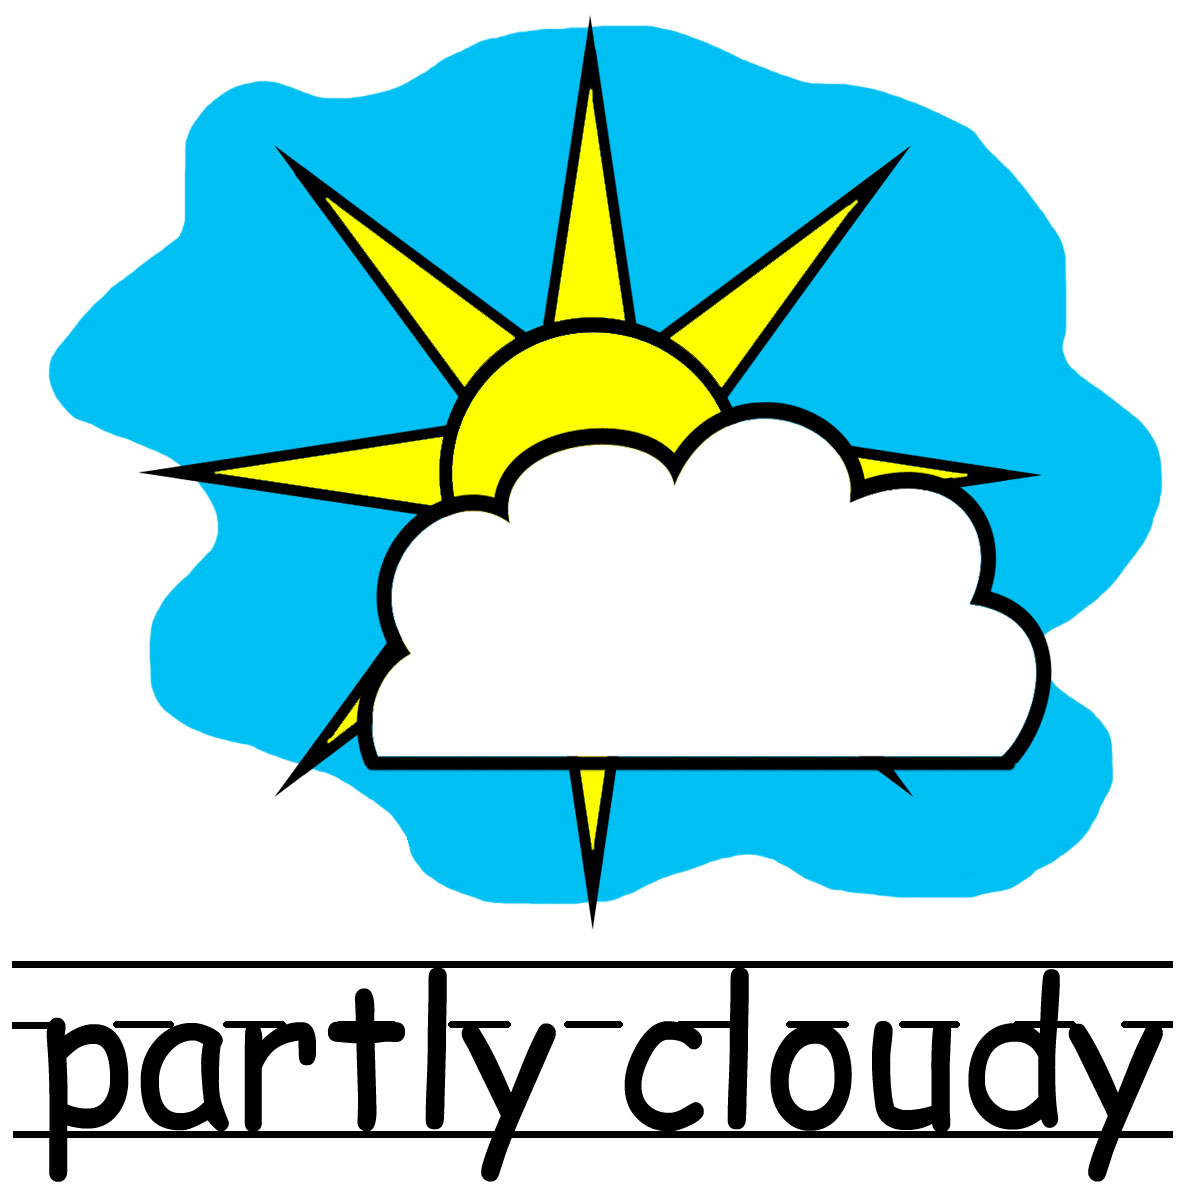 clipart images weather - photo #28